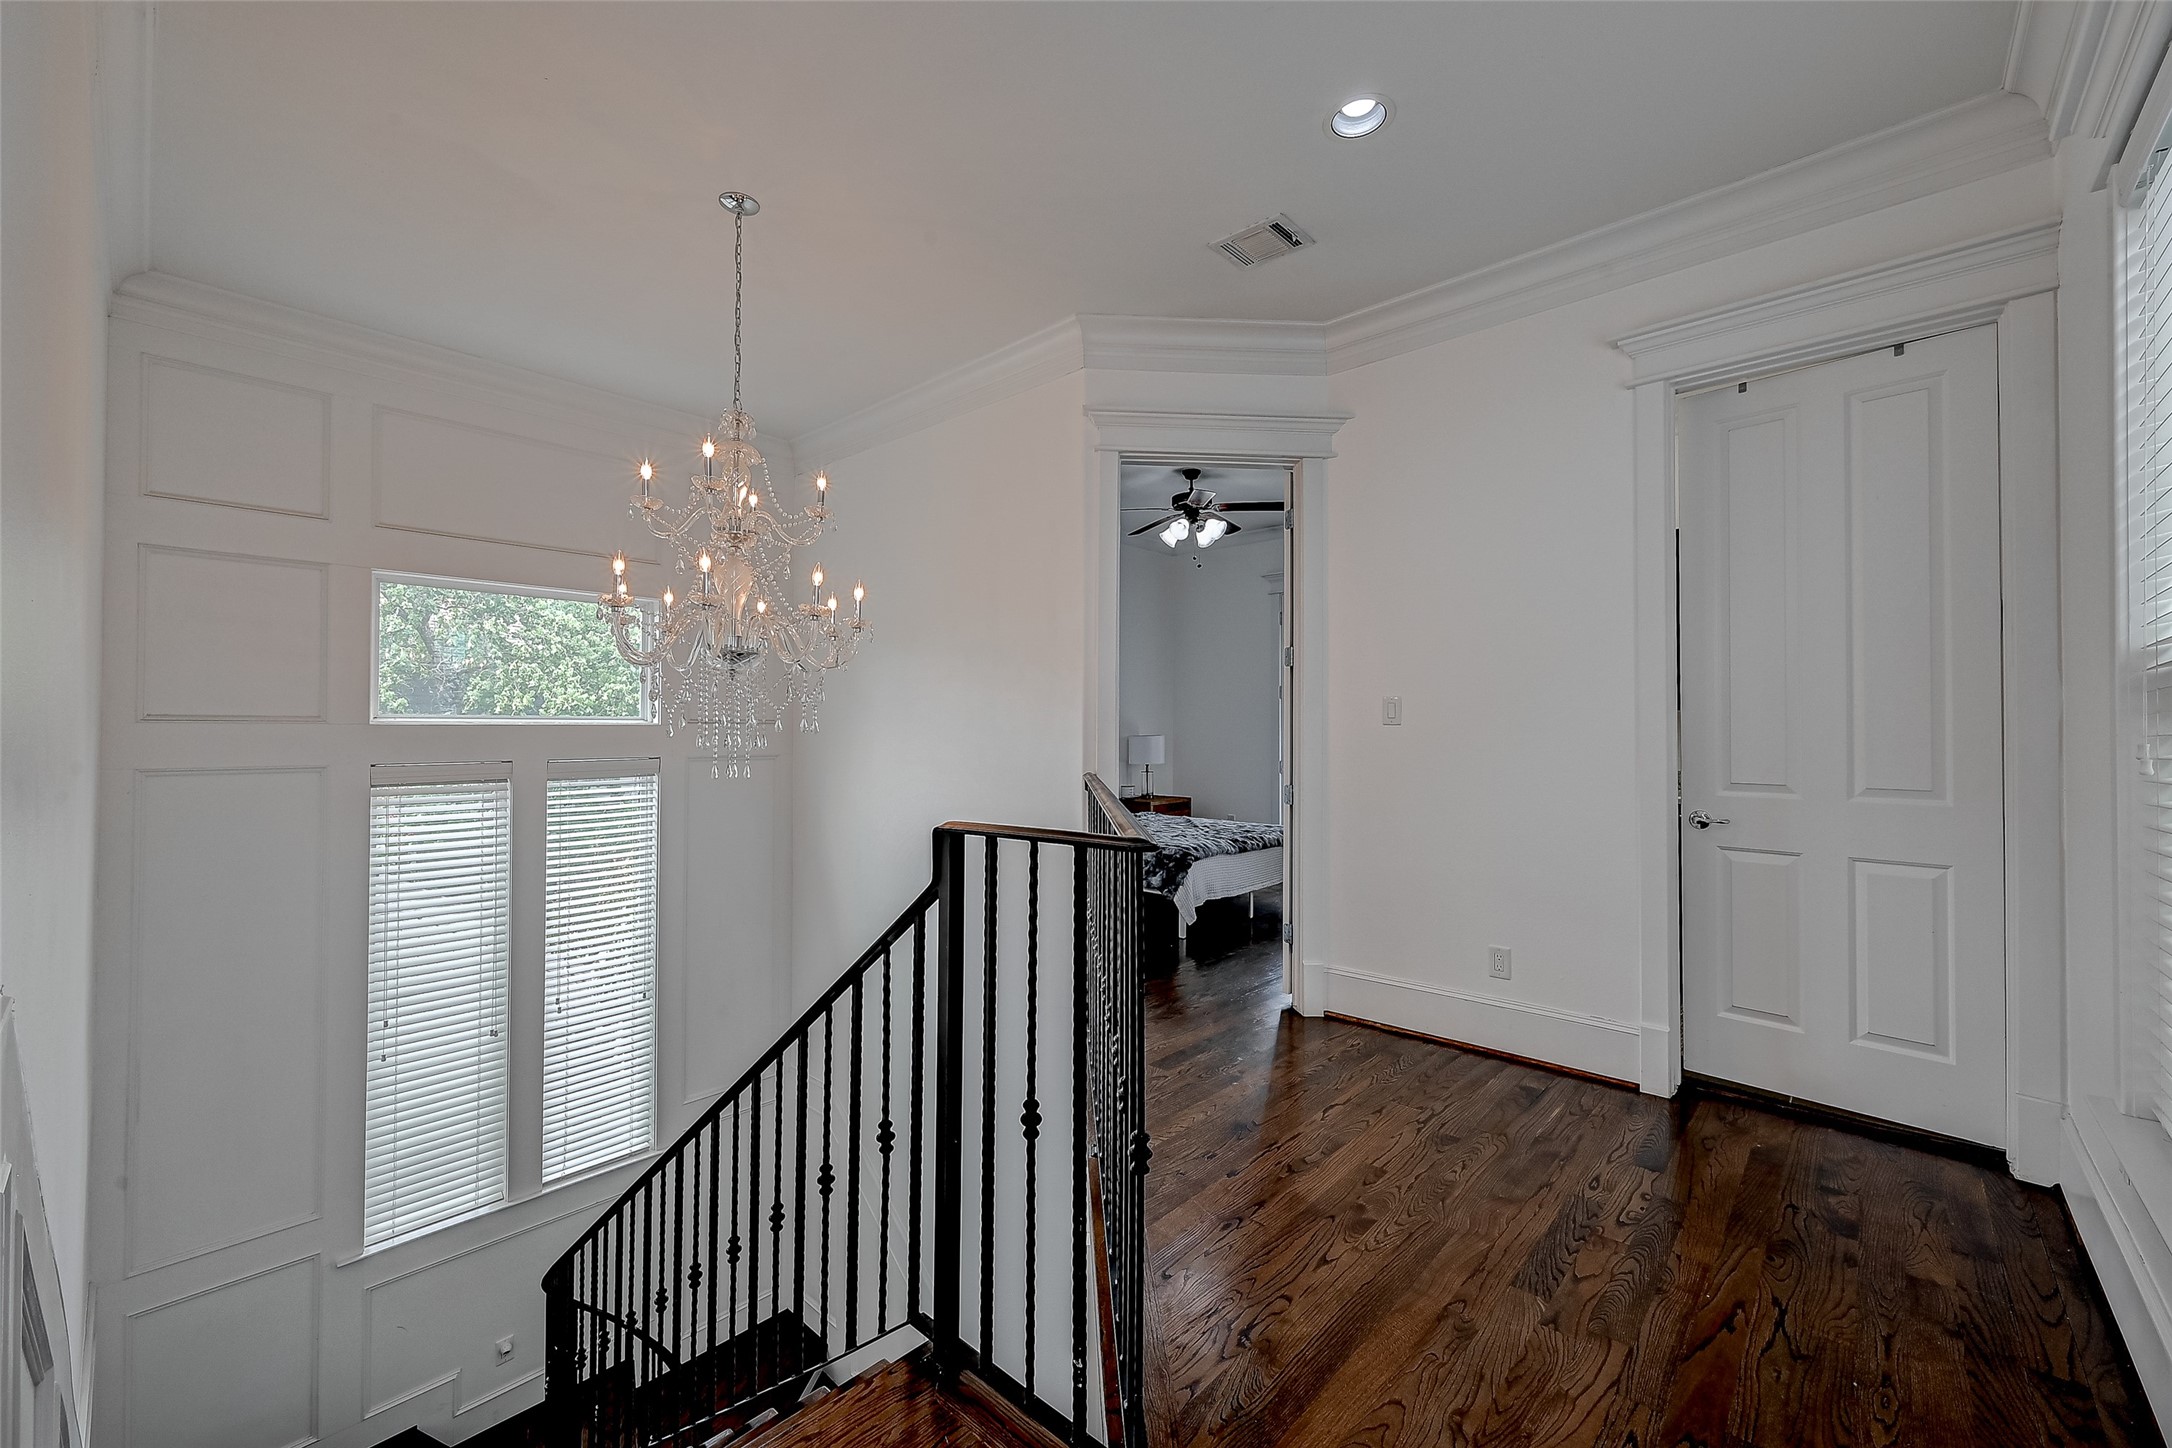 The stairway boasts elegant iron stair railings that lend an air of sophistication, accentuated by a captivating chandelier that illuminates the path with a touch of opulence. Tall windows guide the ascent, drawing in natural light, and culminate in an open second-floor landing that offers a sense of space and connection between levels.